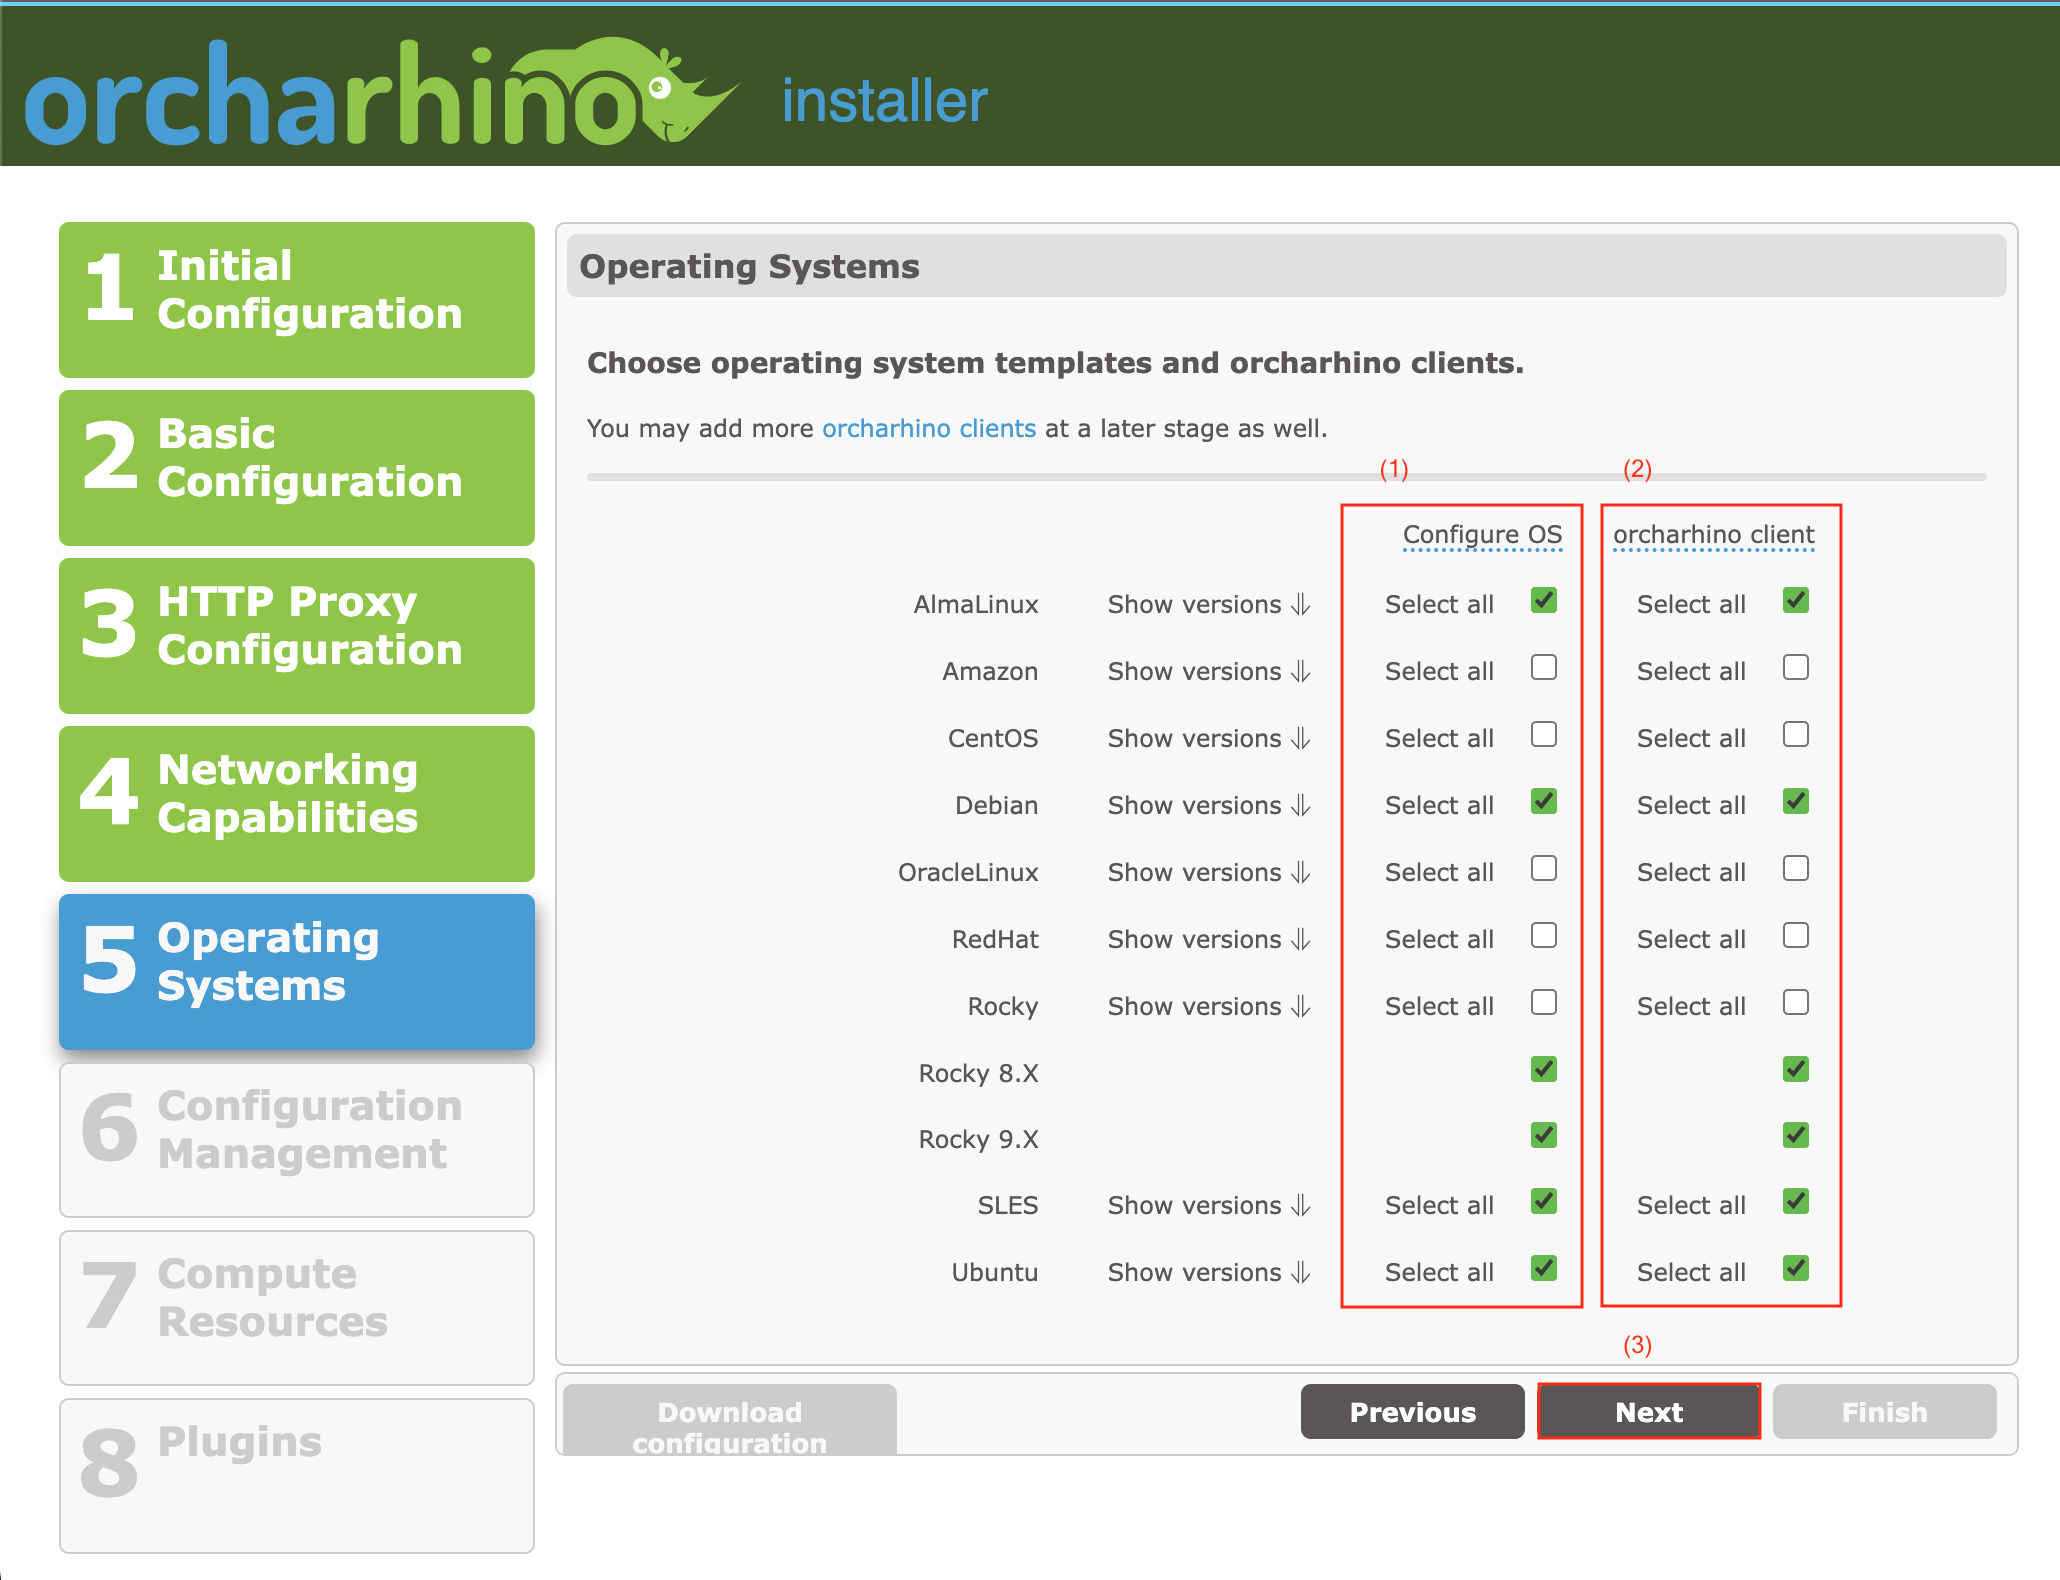 Selecting operating systems in orcharhino Installer GUI